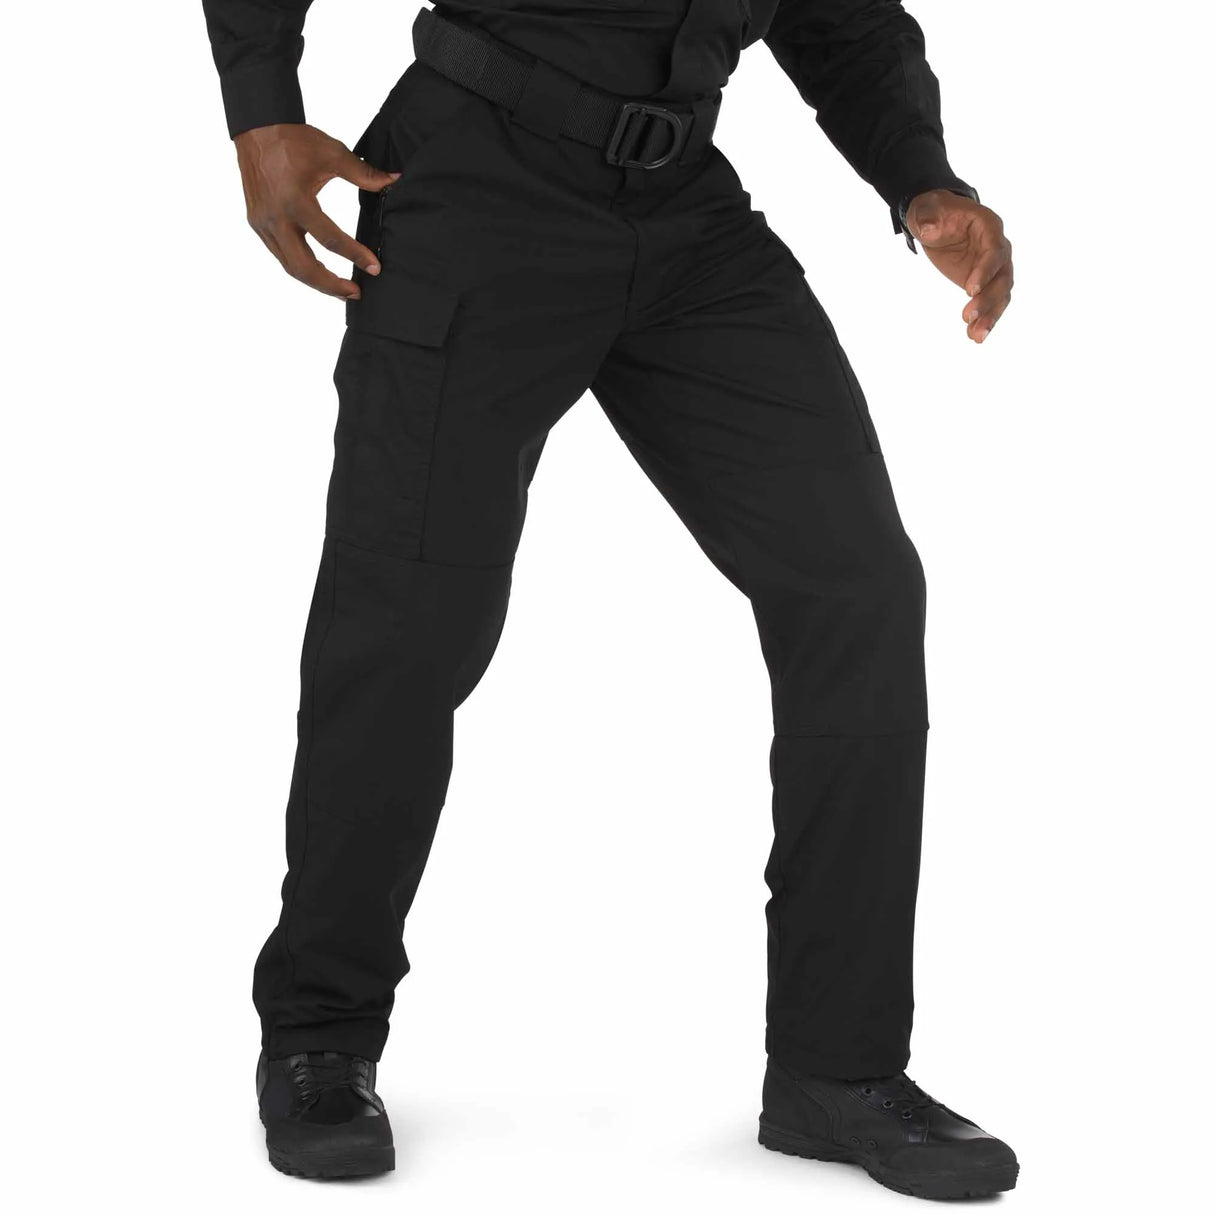 Teflon Finish Tactical Pant: Ensures resistance to stains and soil for long-lasting performance.